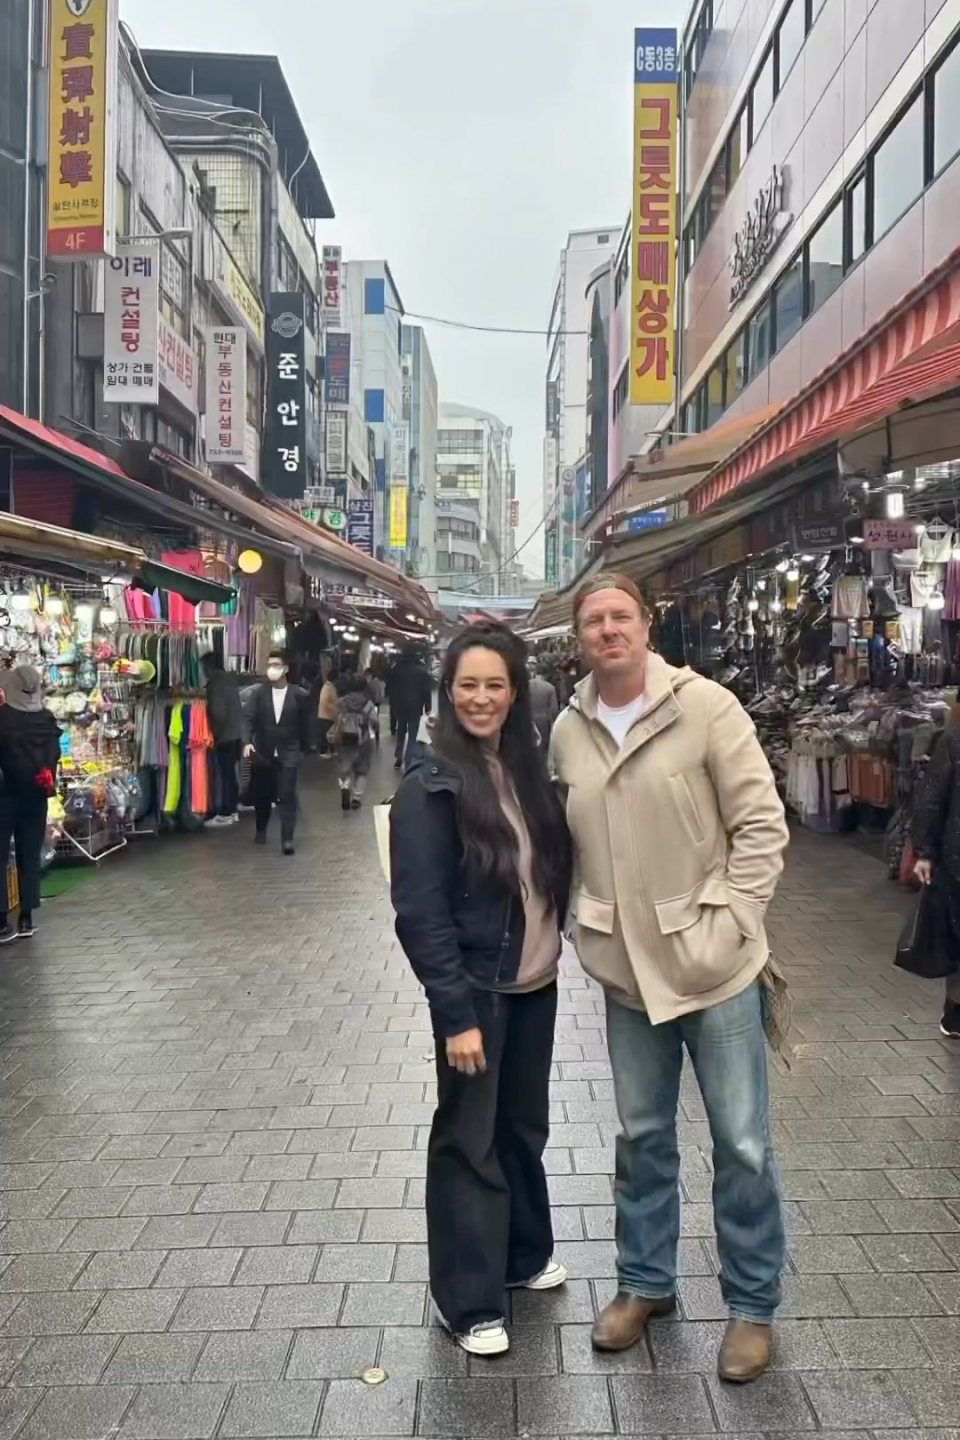 Joanna and Chip Gaines pose for a photo during the family's vacation to Seoul. (Joanna Gaines via Instagram)